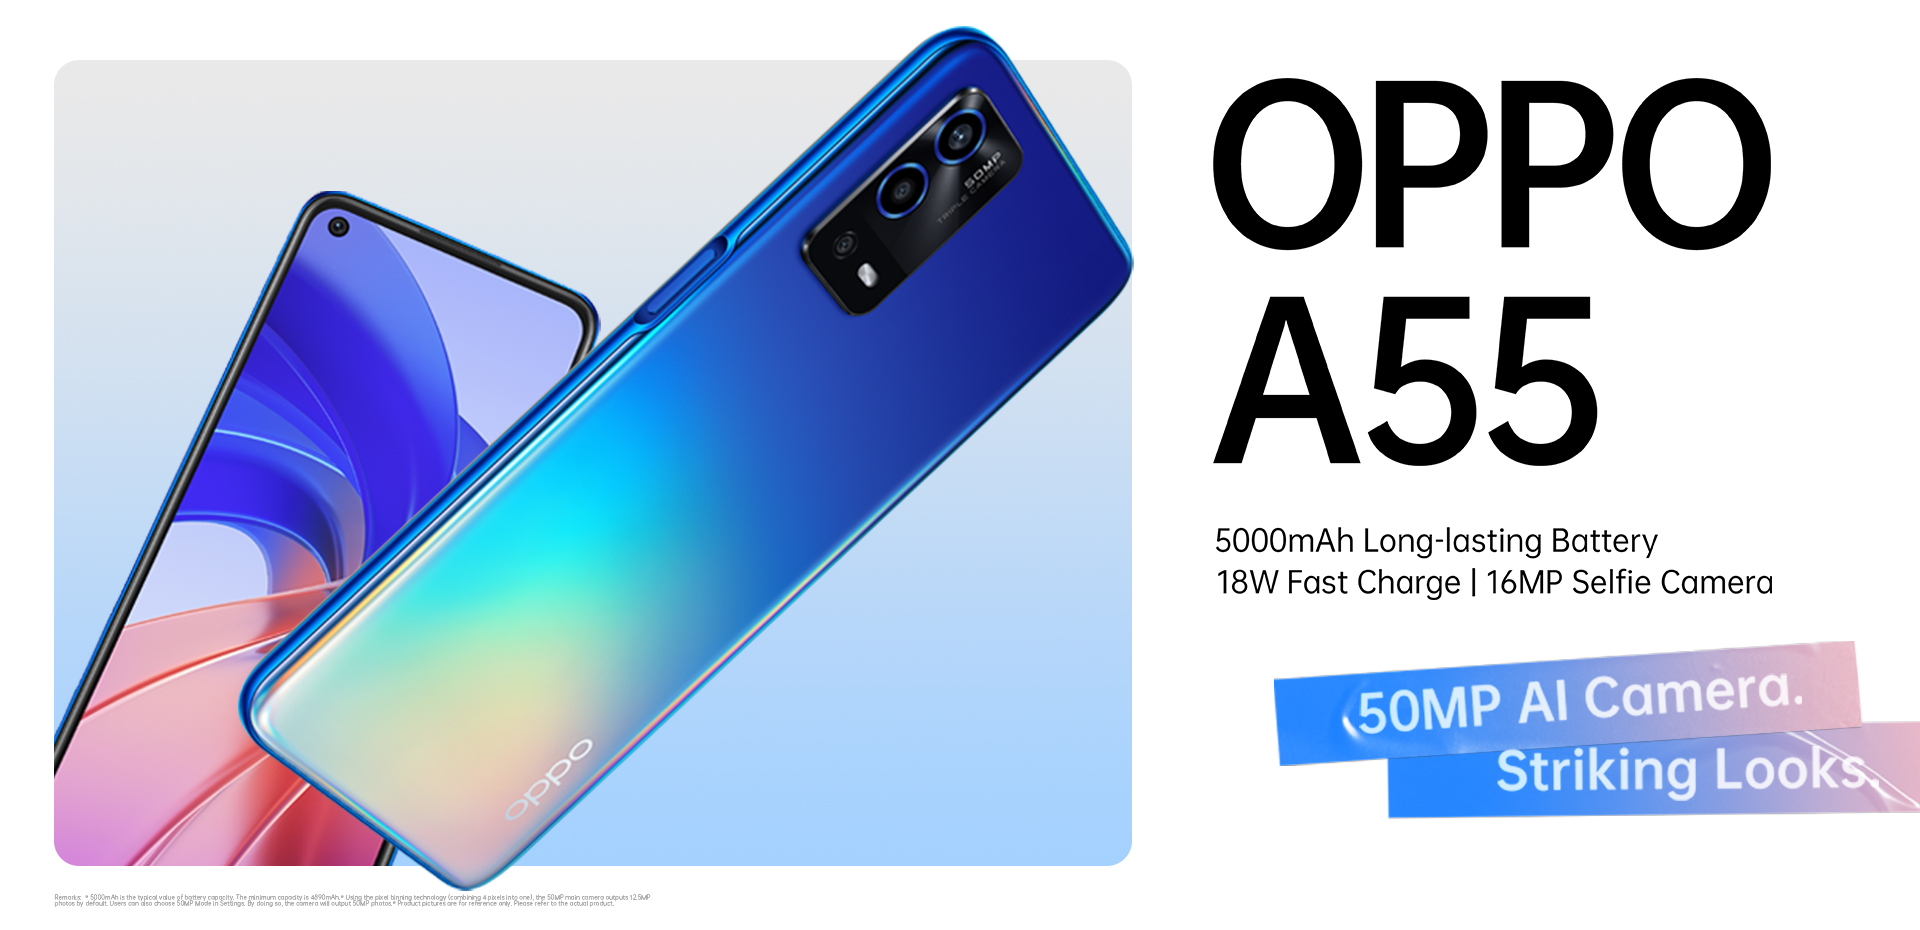 OPPO A55 has true 50MP AI camera, 5000mAh long-lasting battery, 18W fast charge and 16MP selfie camera.